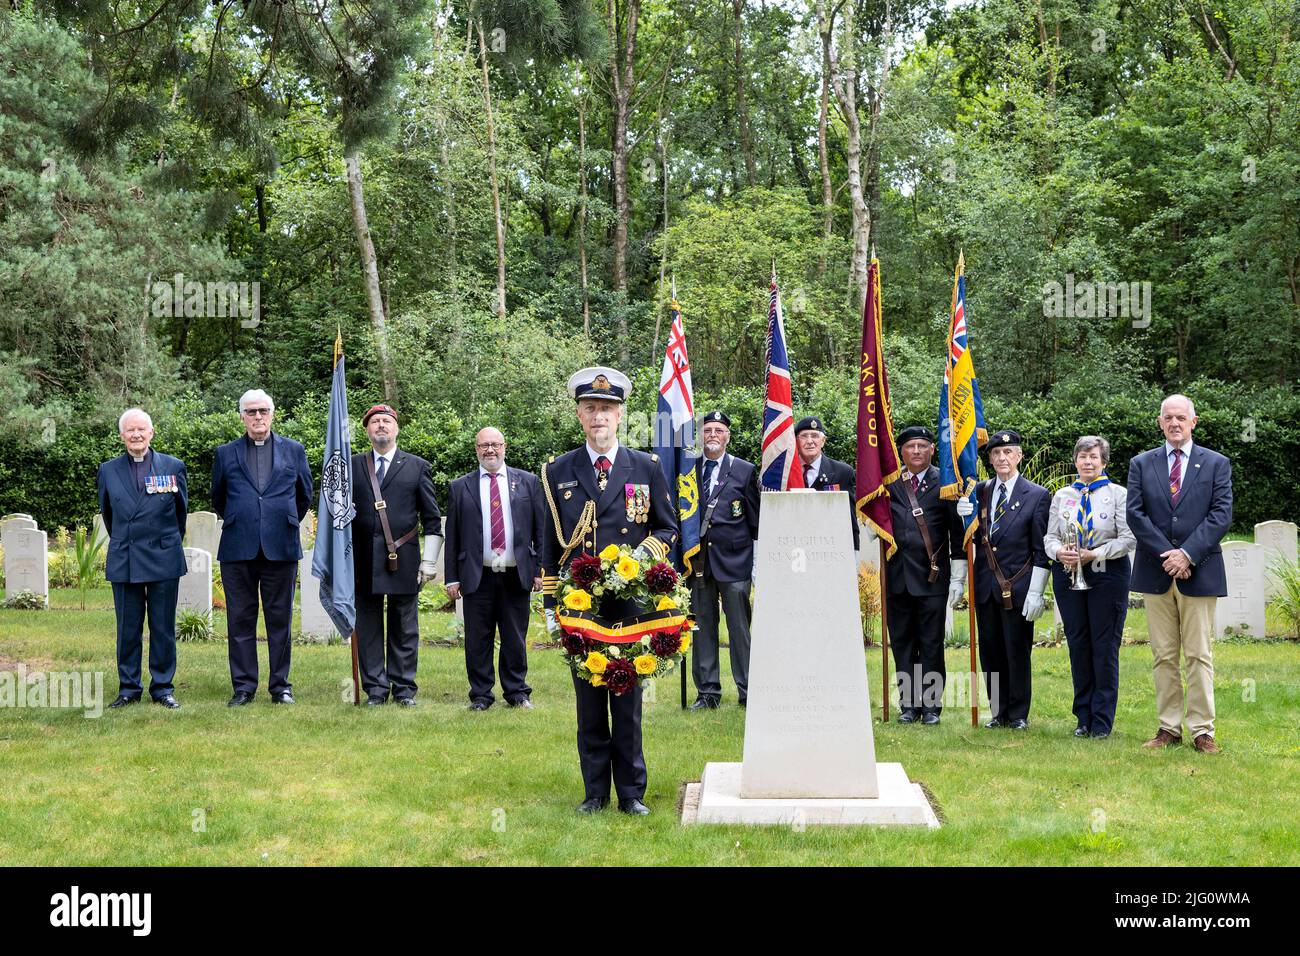 Sun 3rd July 22 Captain (Naval) Flamant, Belgian Defence Attaché holds the Belgian Ambassador's wreath at the WW2 Memorial with Standard Bearers & members of the Brookwood Last Post Association & author Paul McCue (extreme right) who remembered & honoured the Belgian fallen. Stock Photo